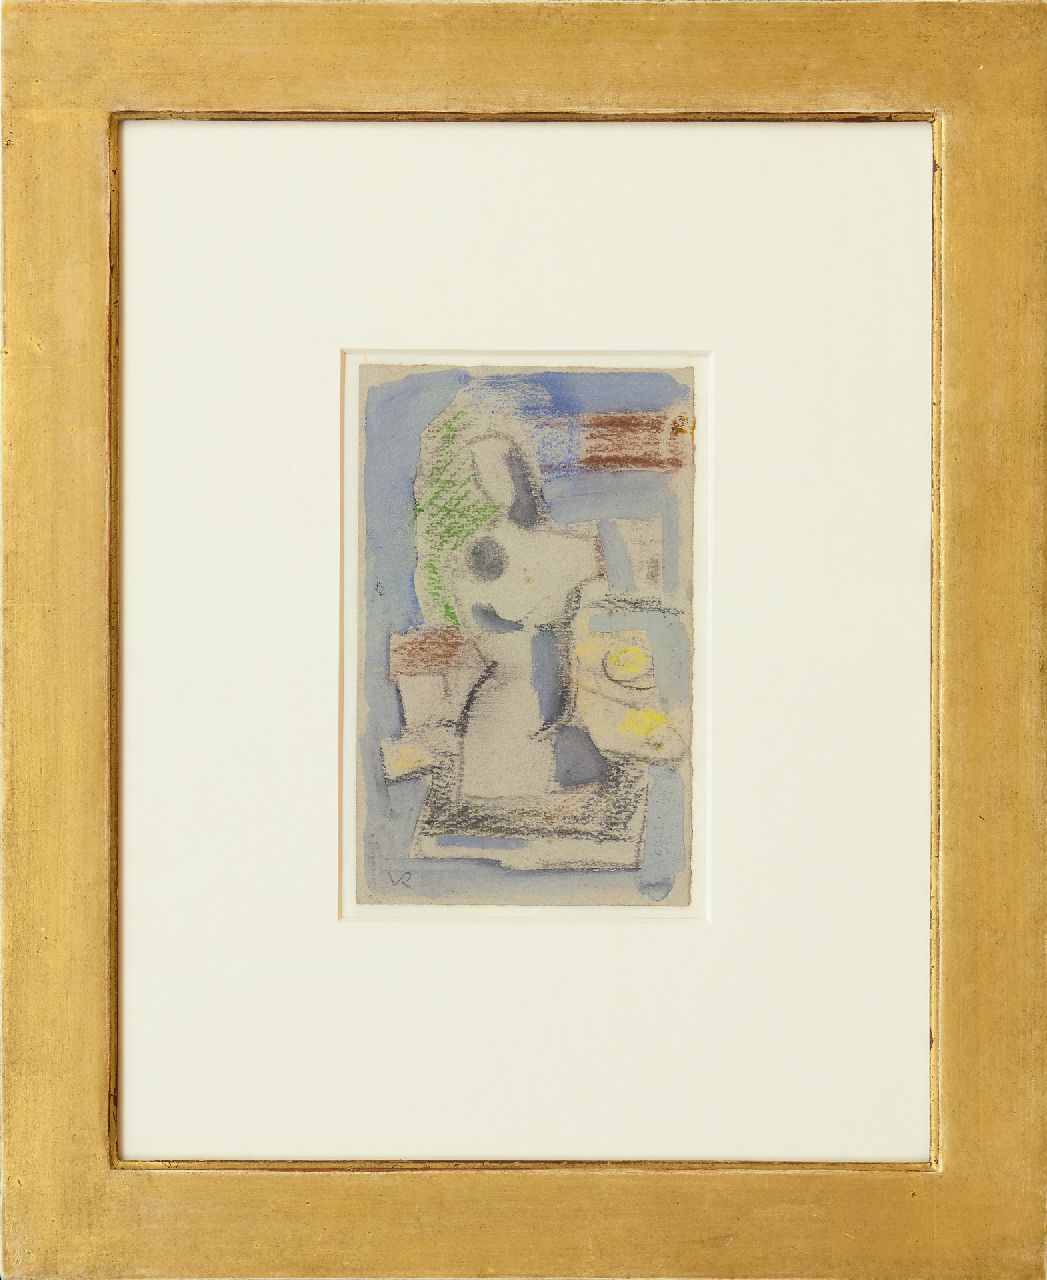 Rees O. van | Otto van Rees | Watercolours and drawings offered for sale | Composition with torso, chalk and watercolour on paper 17.5 x 11.5 cm, painted ca. 1949